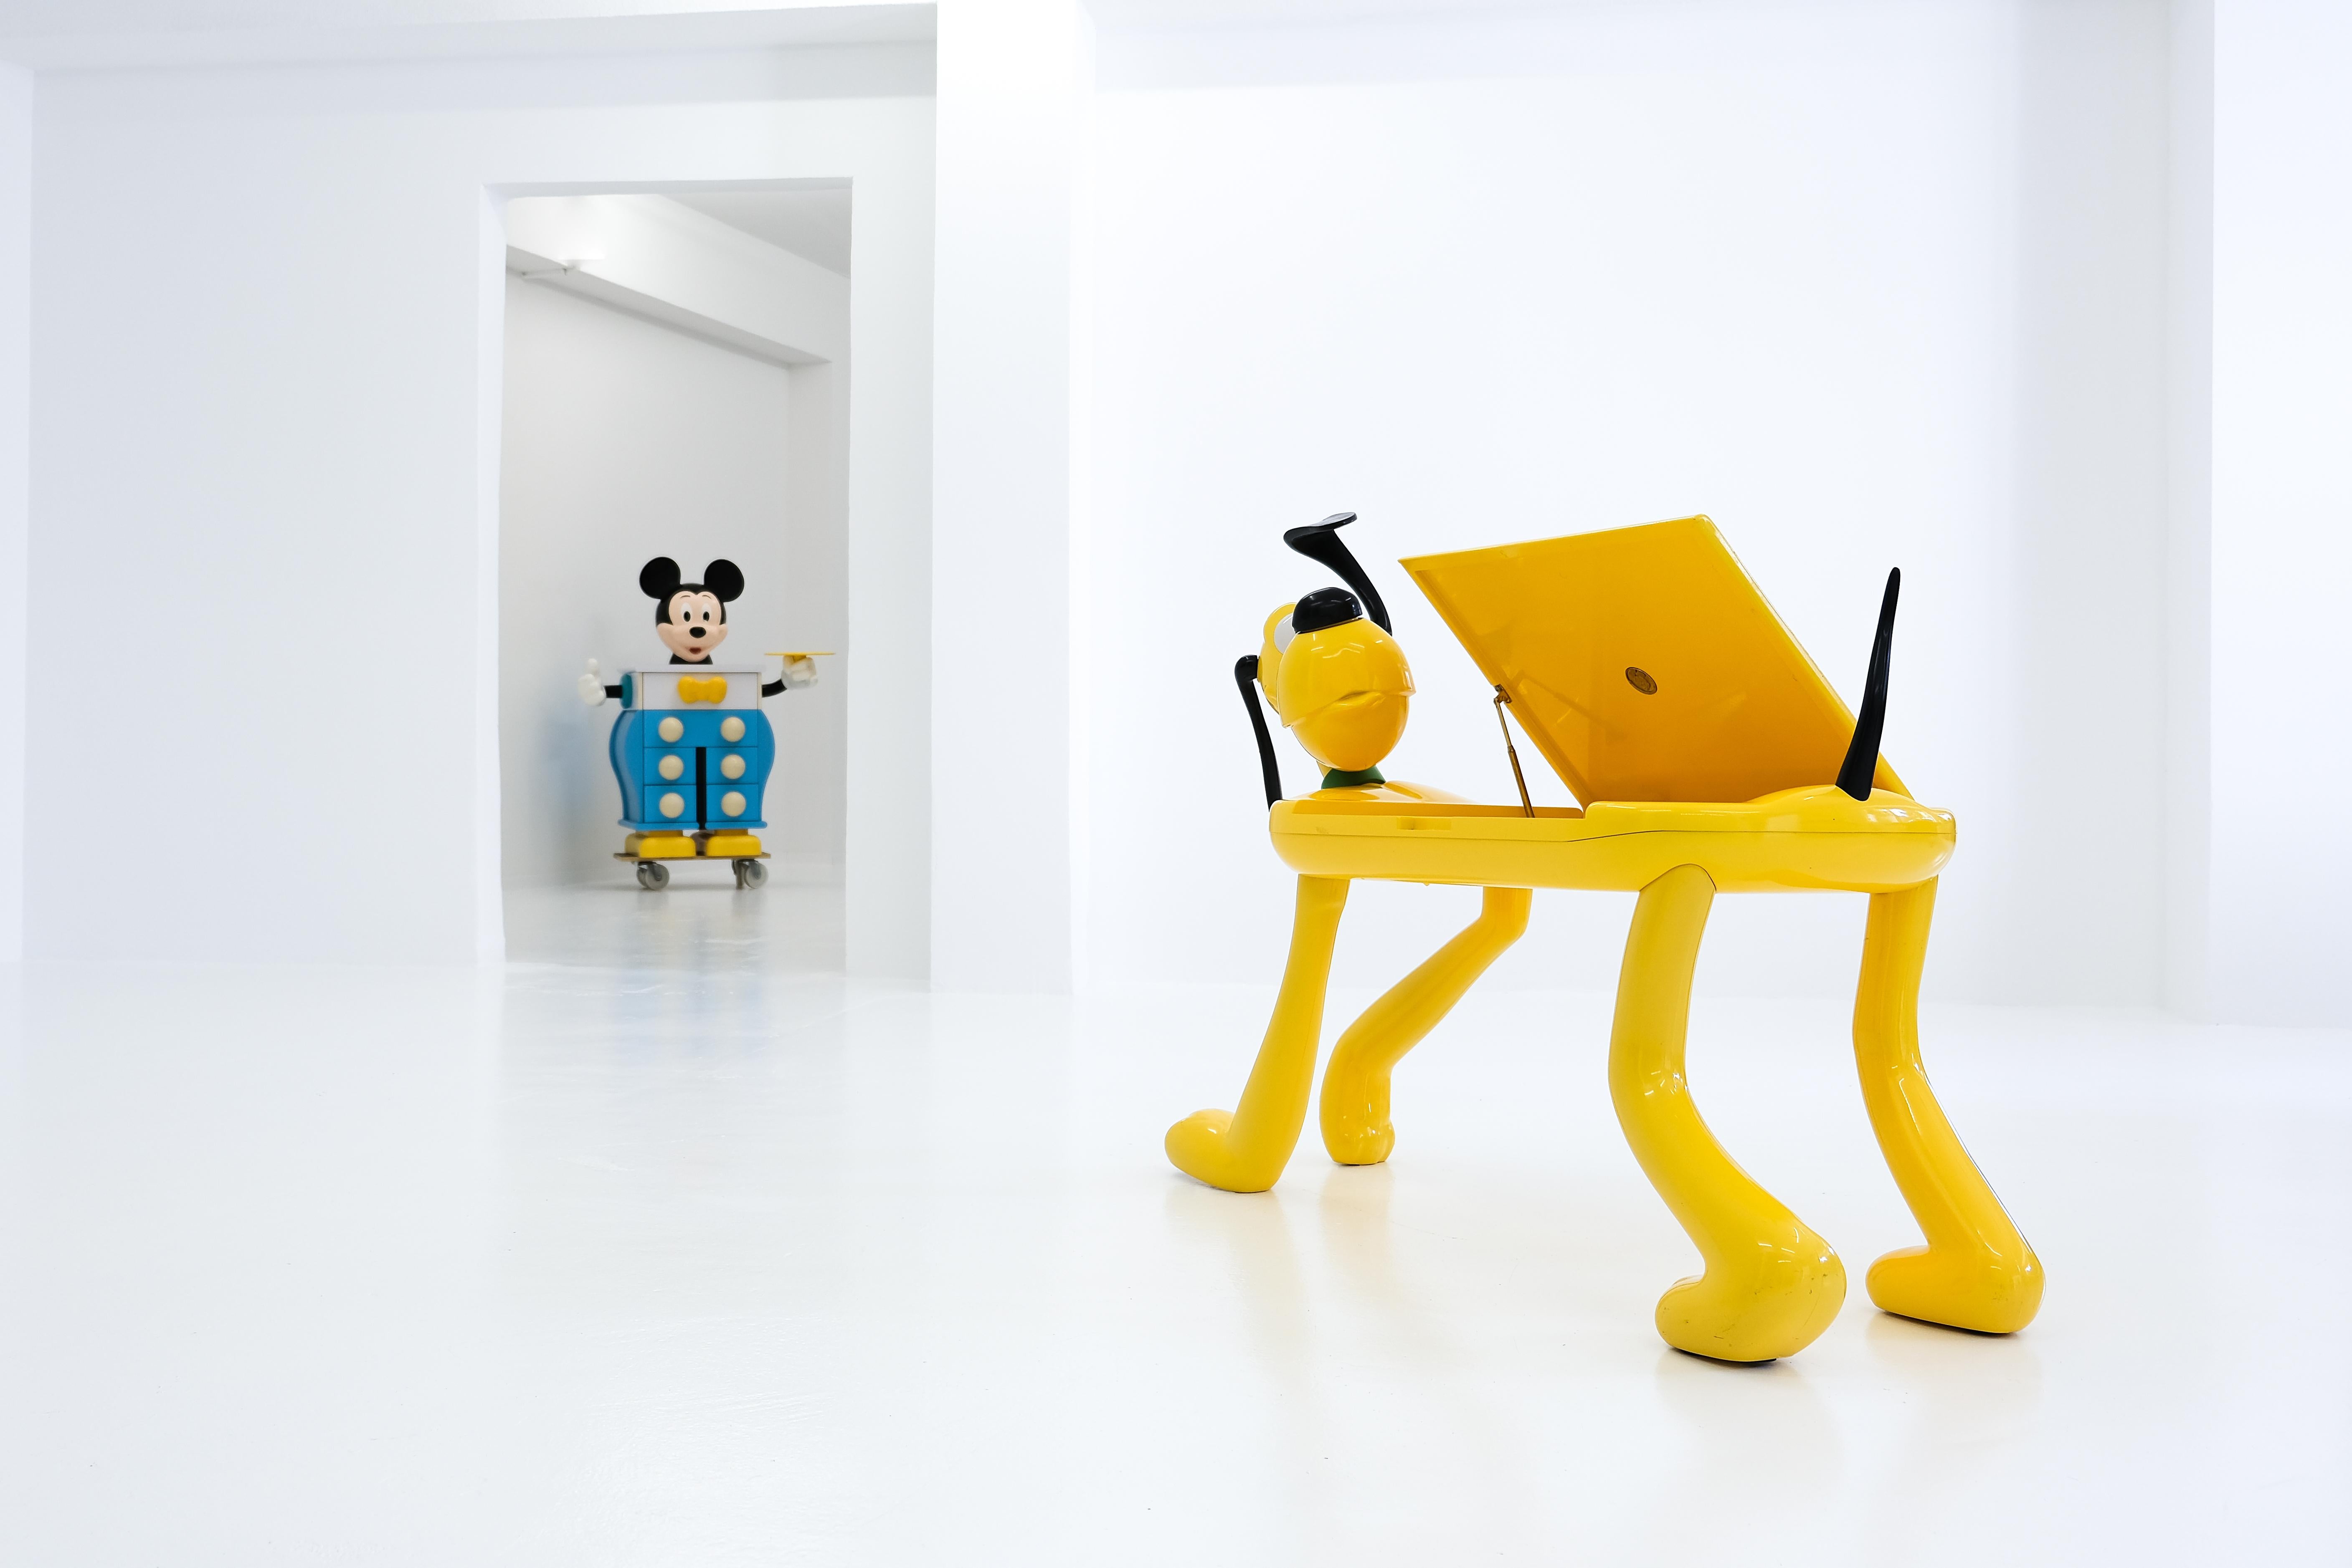 Resin Pluto Kids Table/Play Desk by Pierre Colleu for Disney, Manufactured by Starform